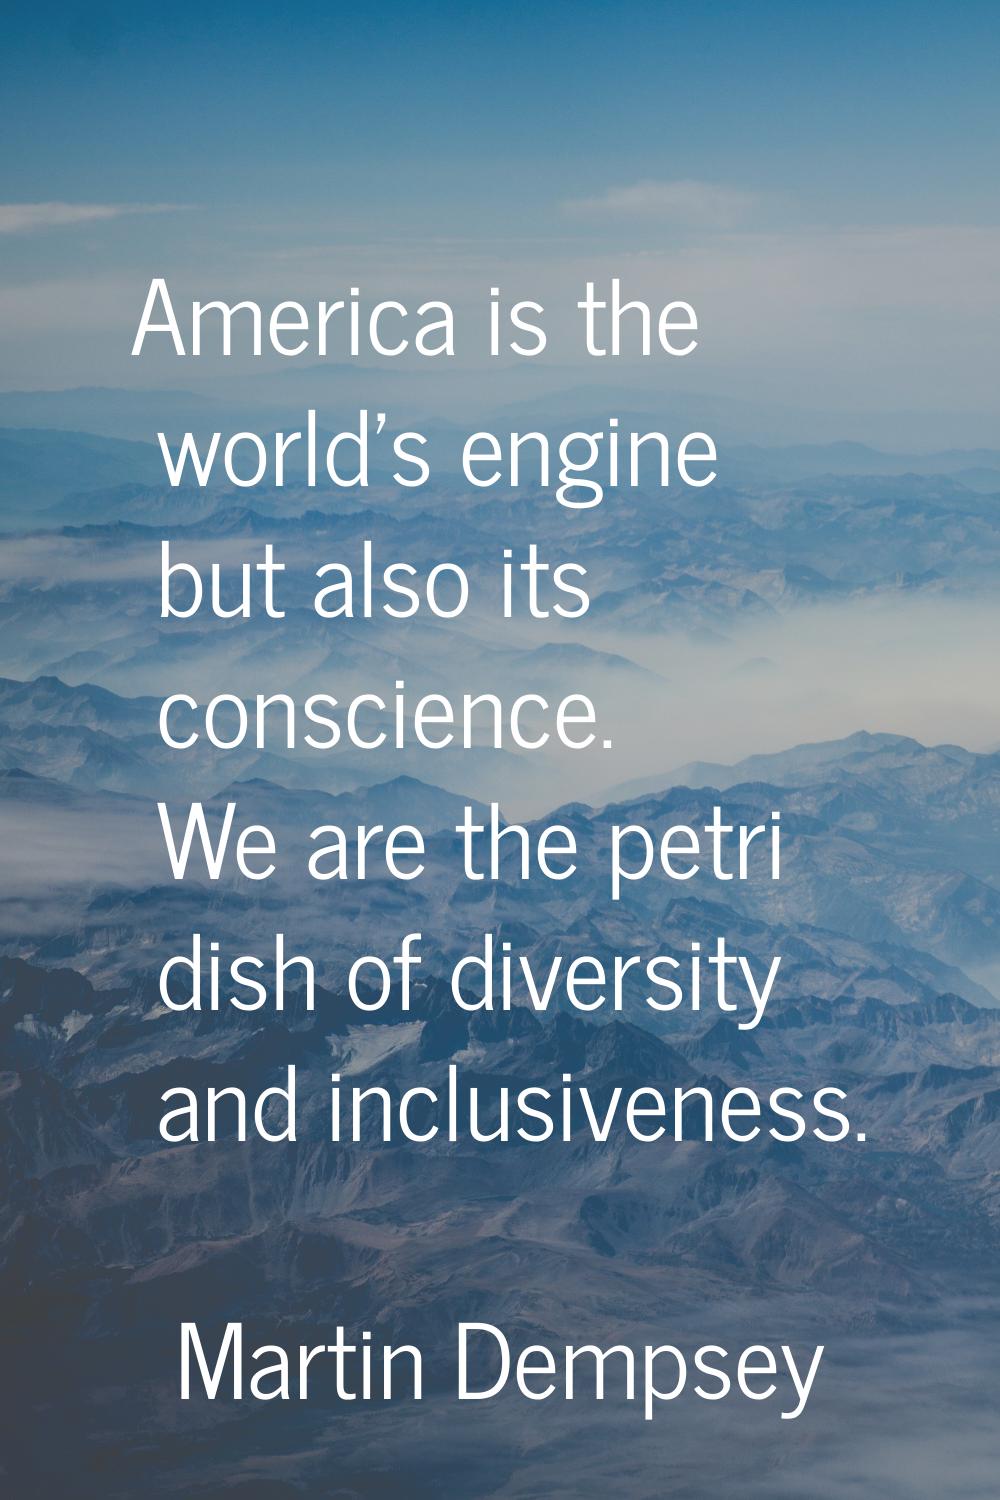 America is the world's engine but also its conscience. We are the petri dish of diversity and inclu